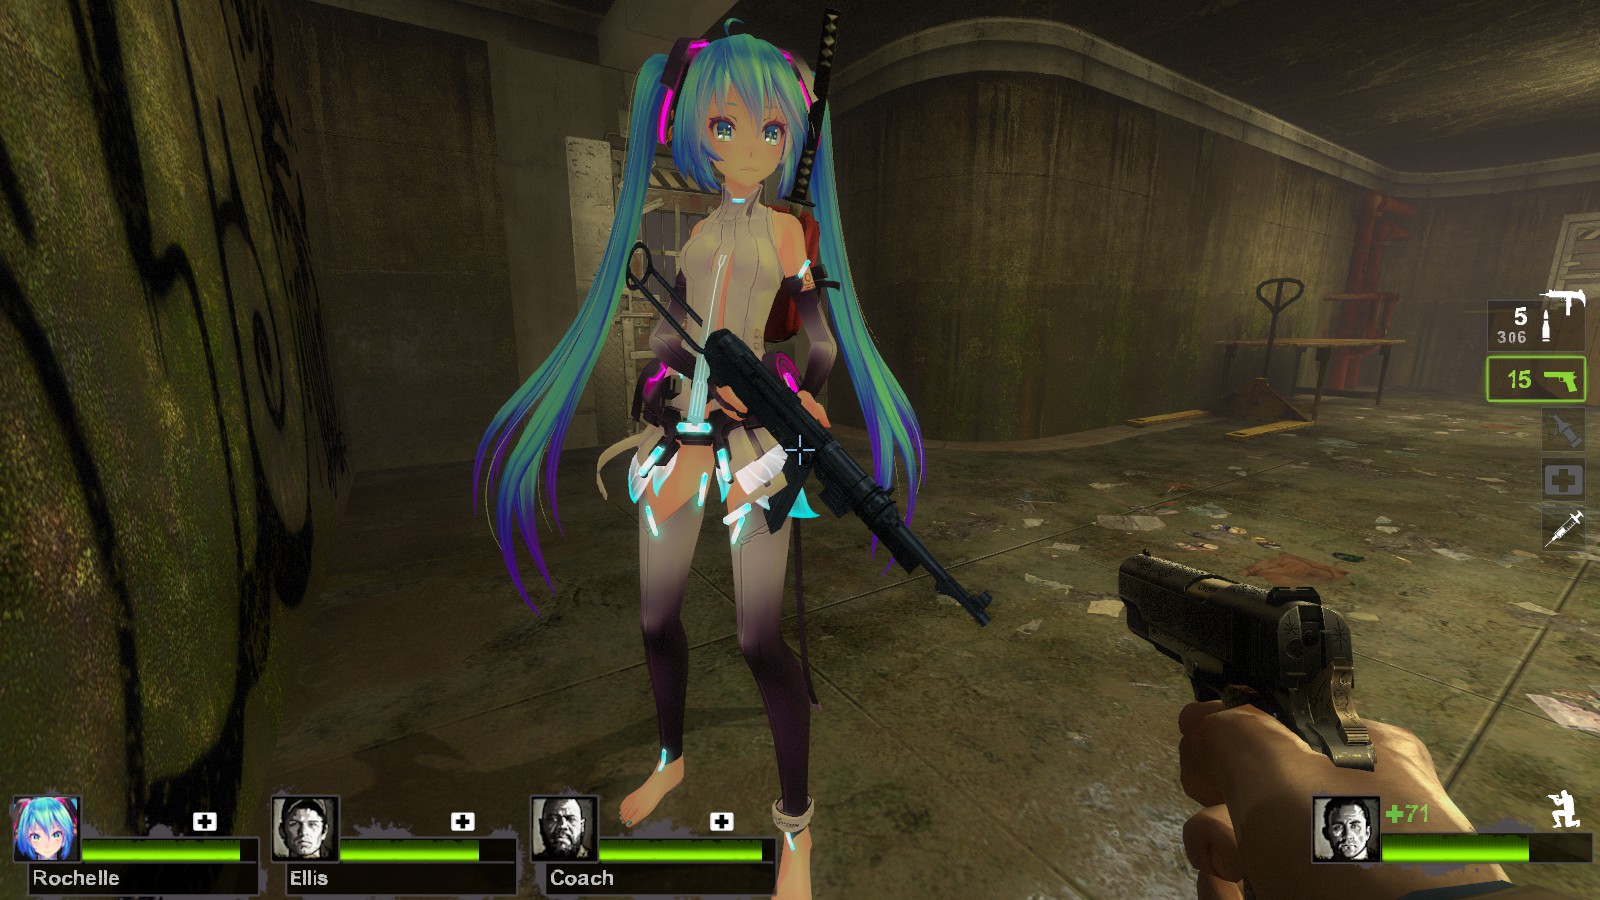 Me playing Left 4 Dead 2 image - Anime Fans of modDB - Mod D